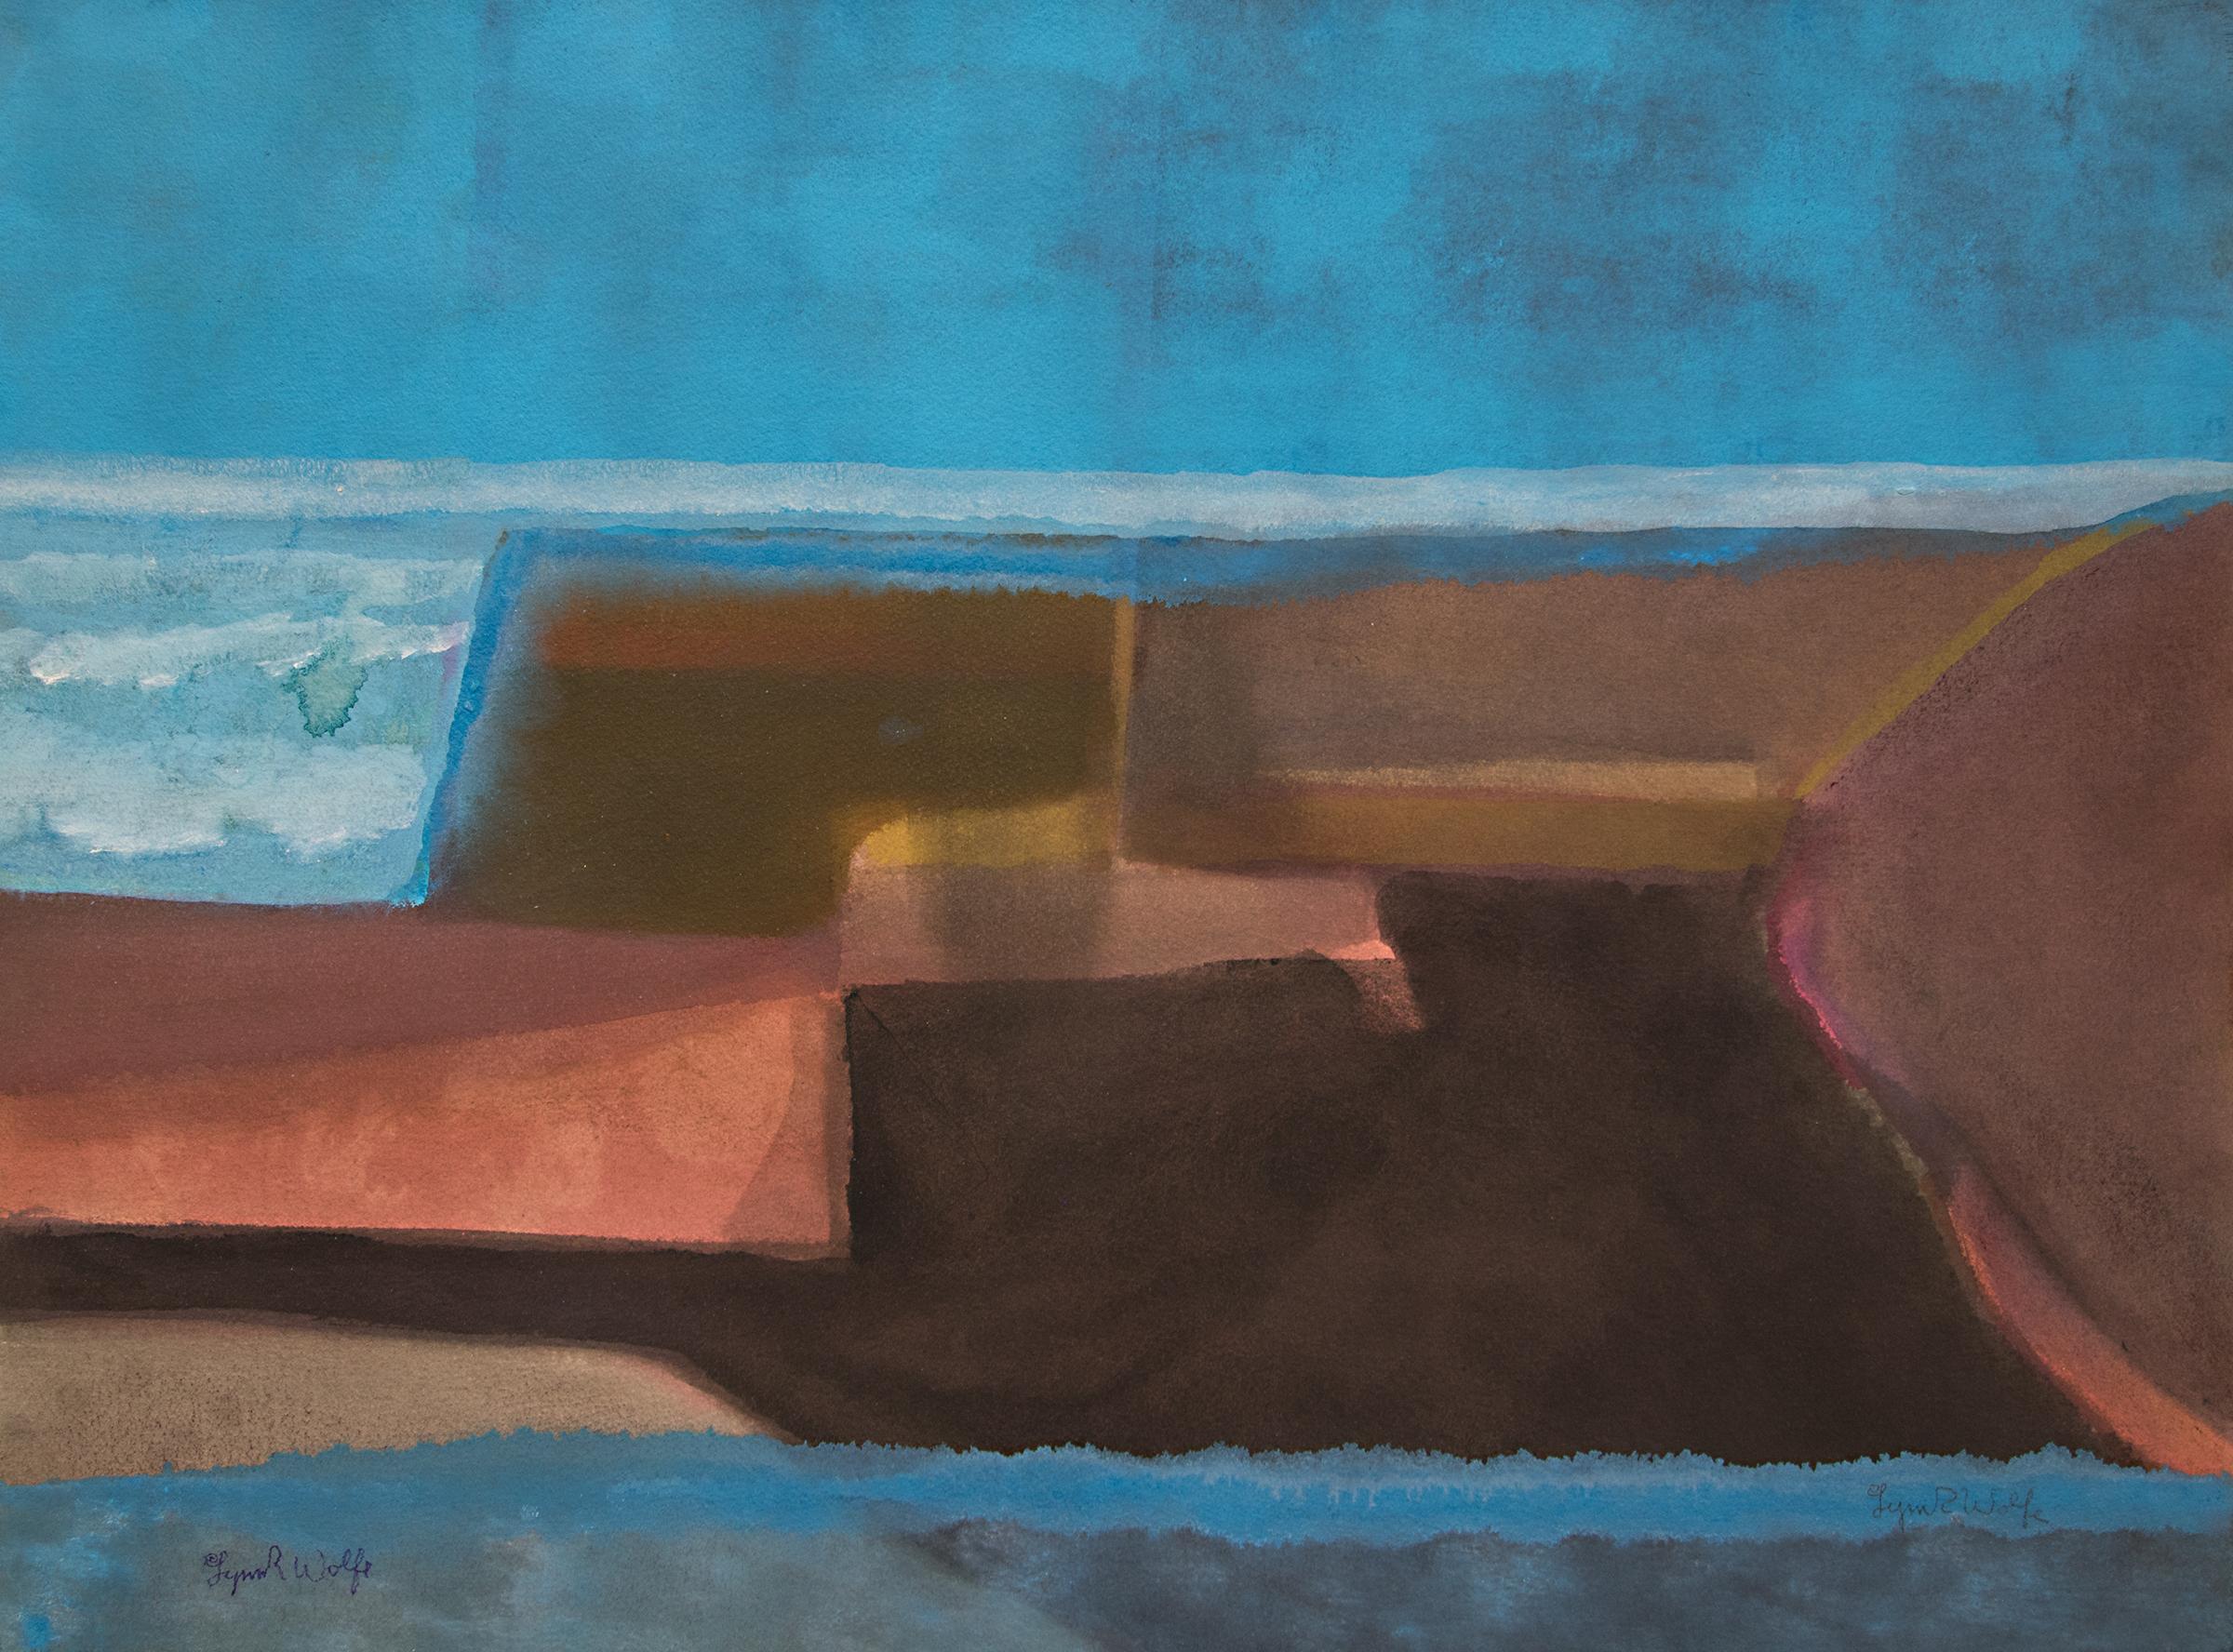 Untitled (Abstract Painting in Shades of Blue, Brown, Reddish Pink and Yellow) 1